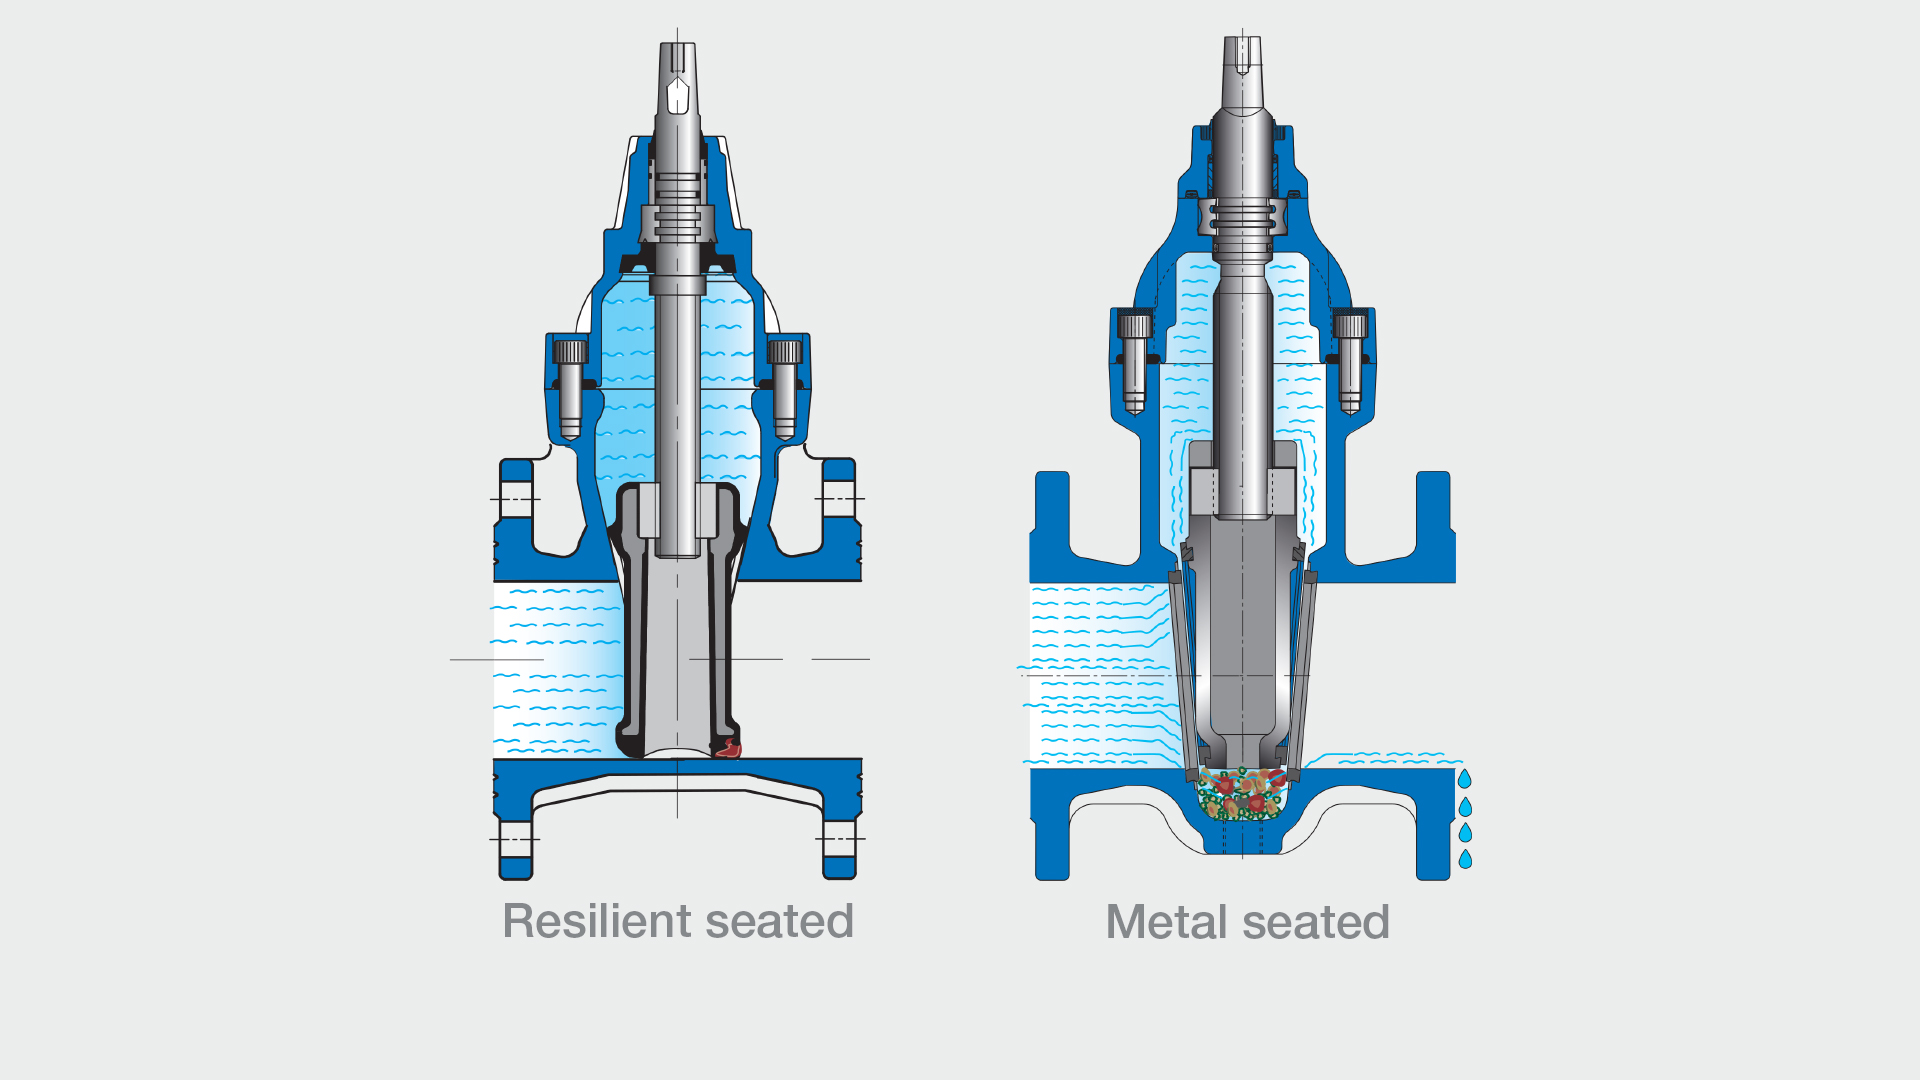 Illustration of resilient seated vs metal seated gate valves